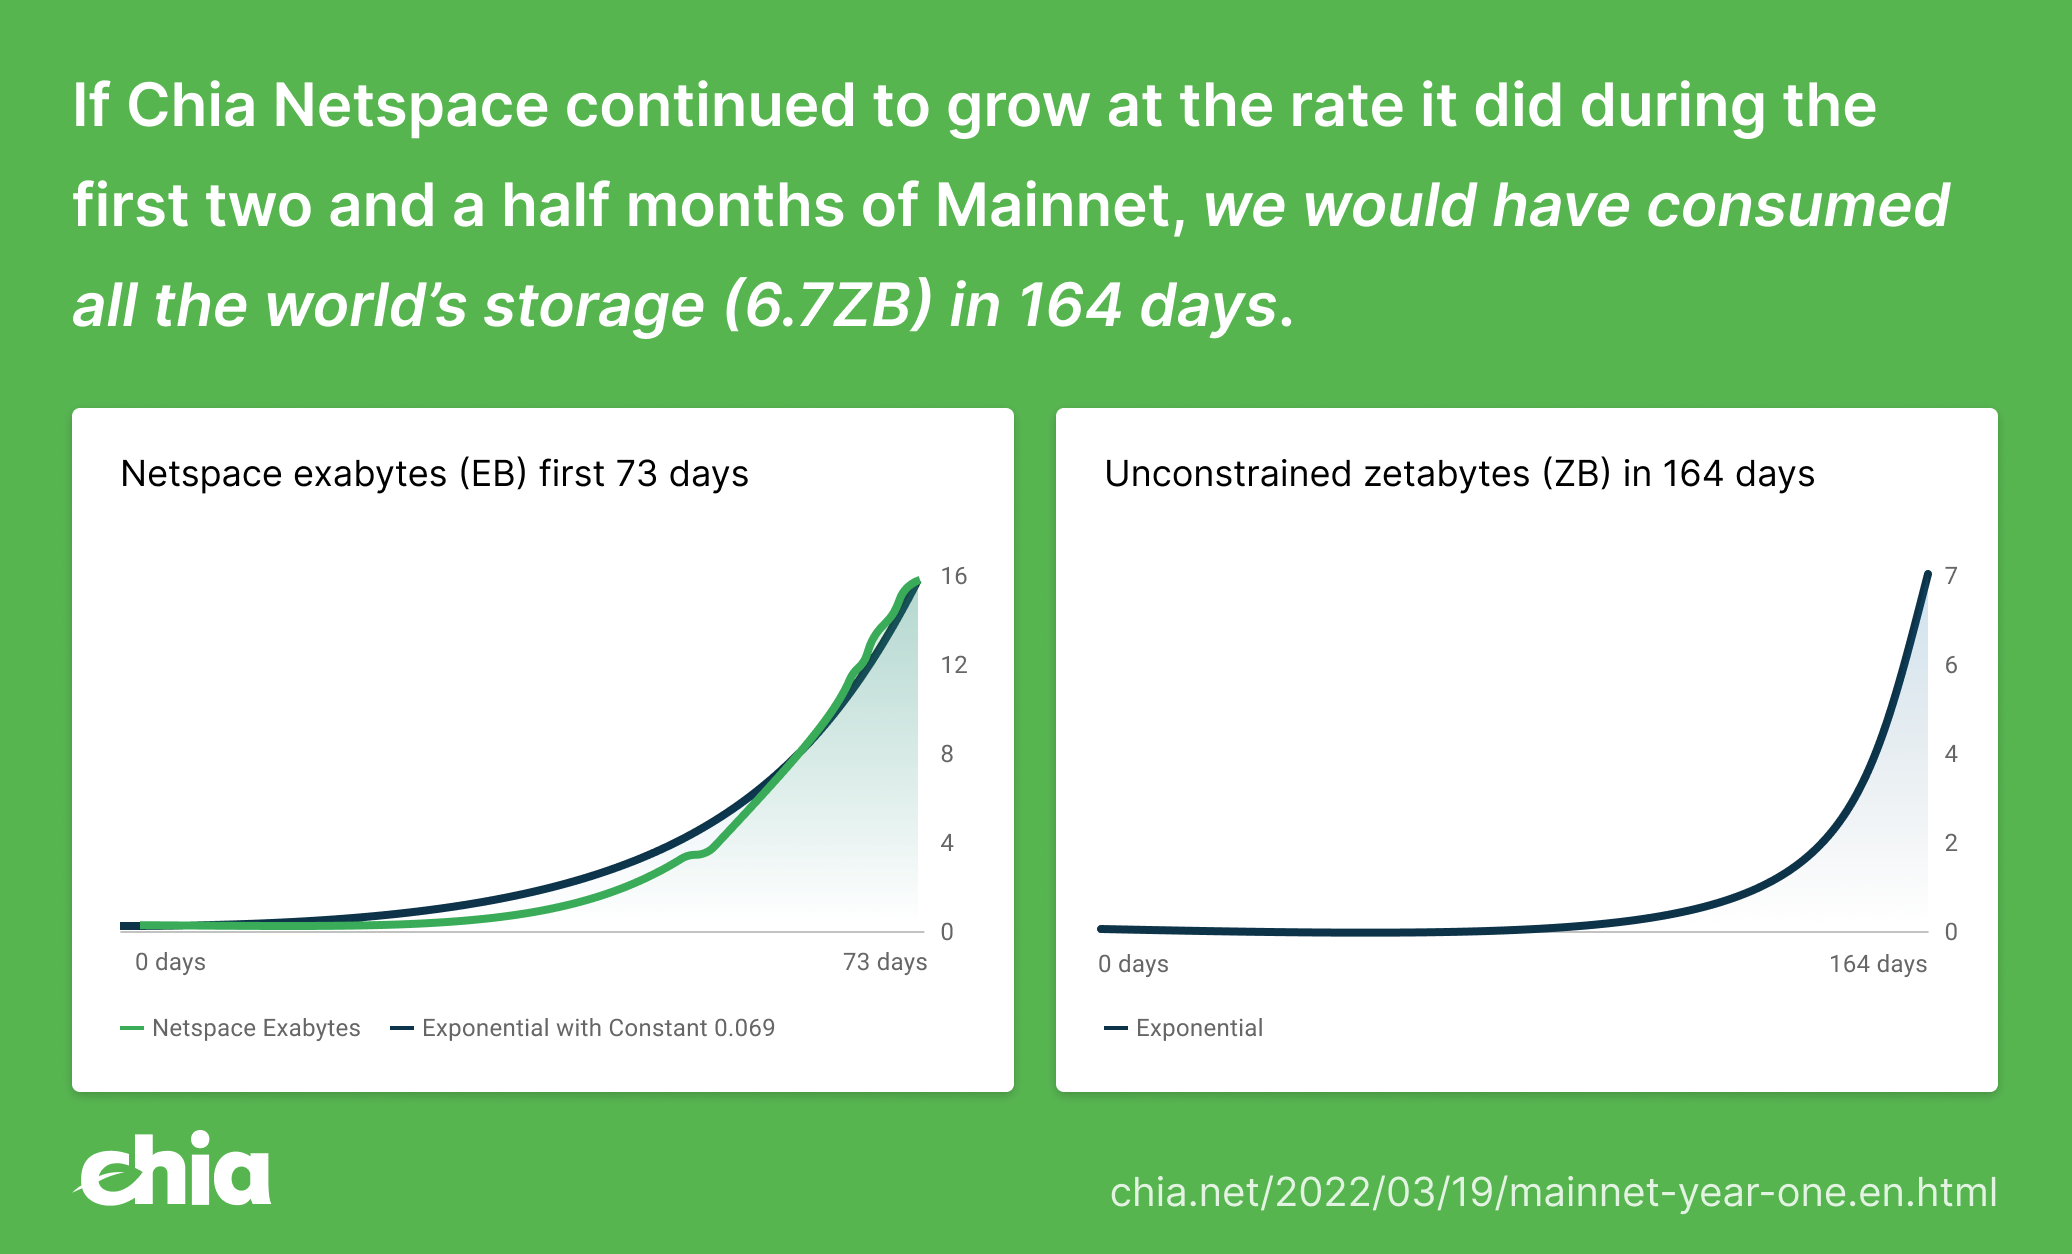 Chia Netspace Growth Rate